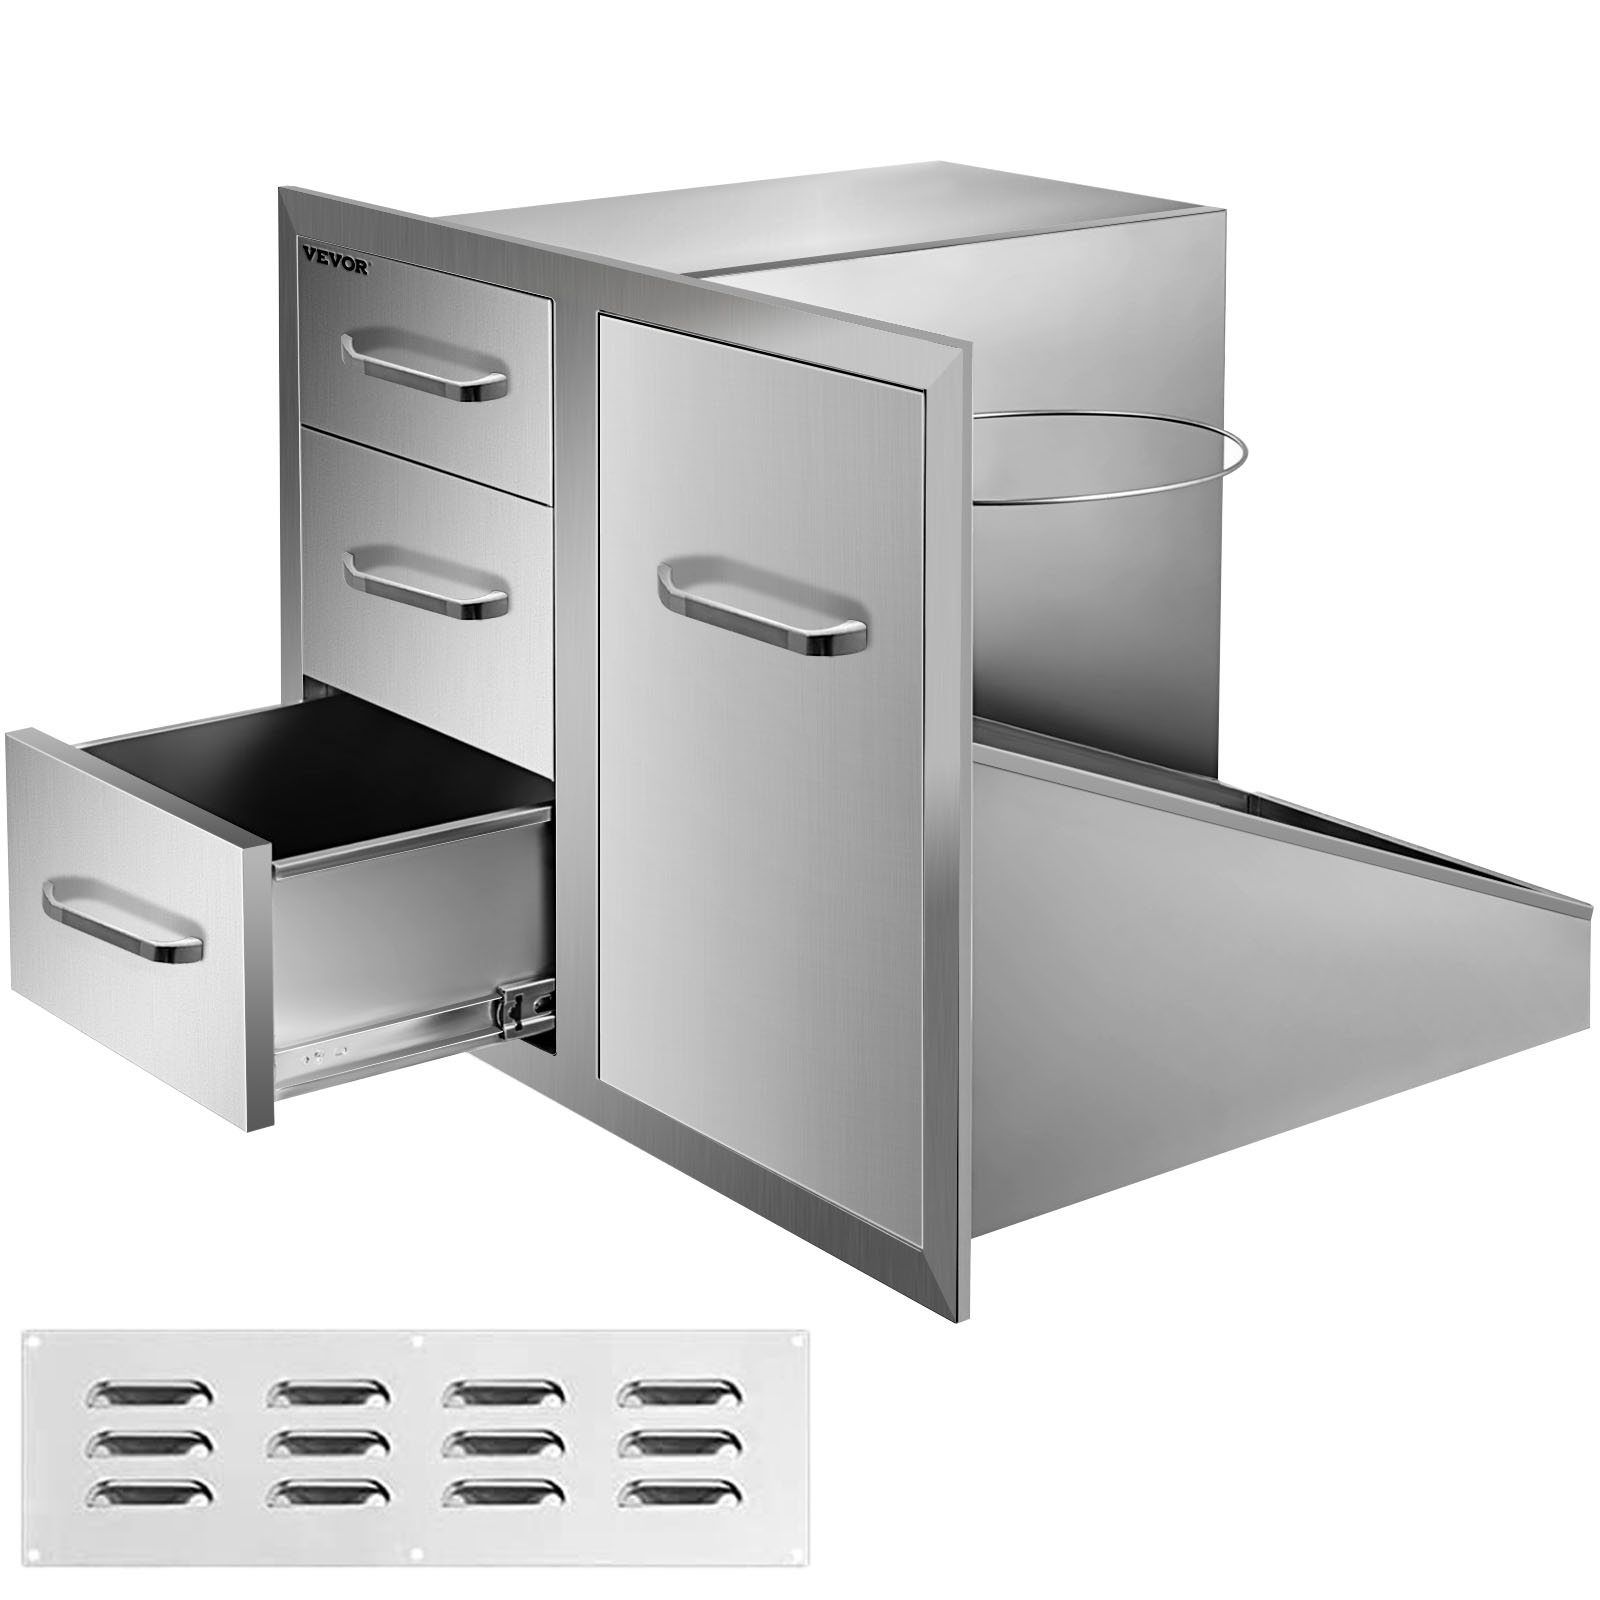 Details about   VEVOR BBQ Island Slide Out Trash Propane Storage Drawer Stainless Steel 16"x22" 